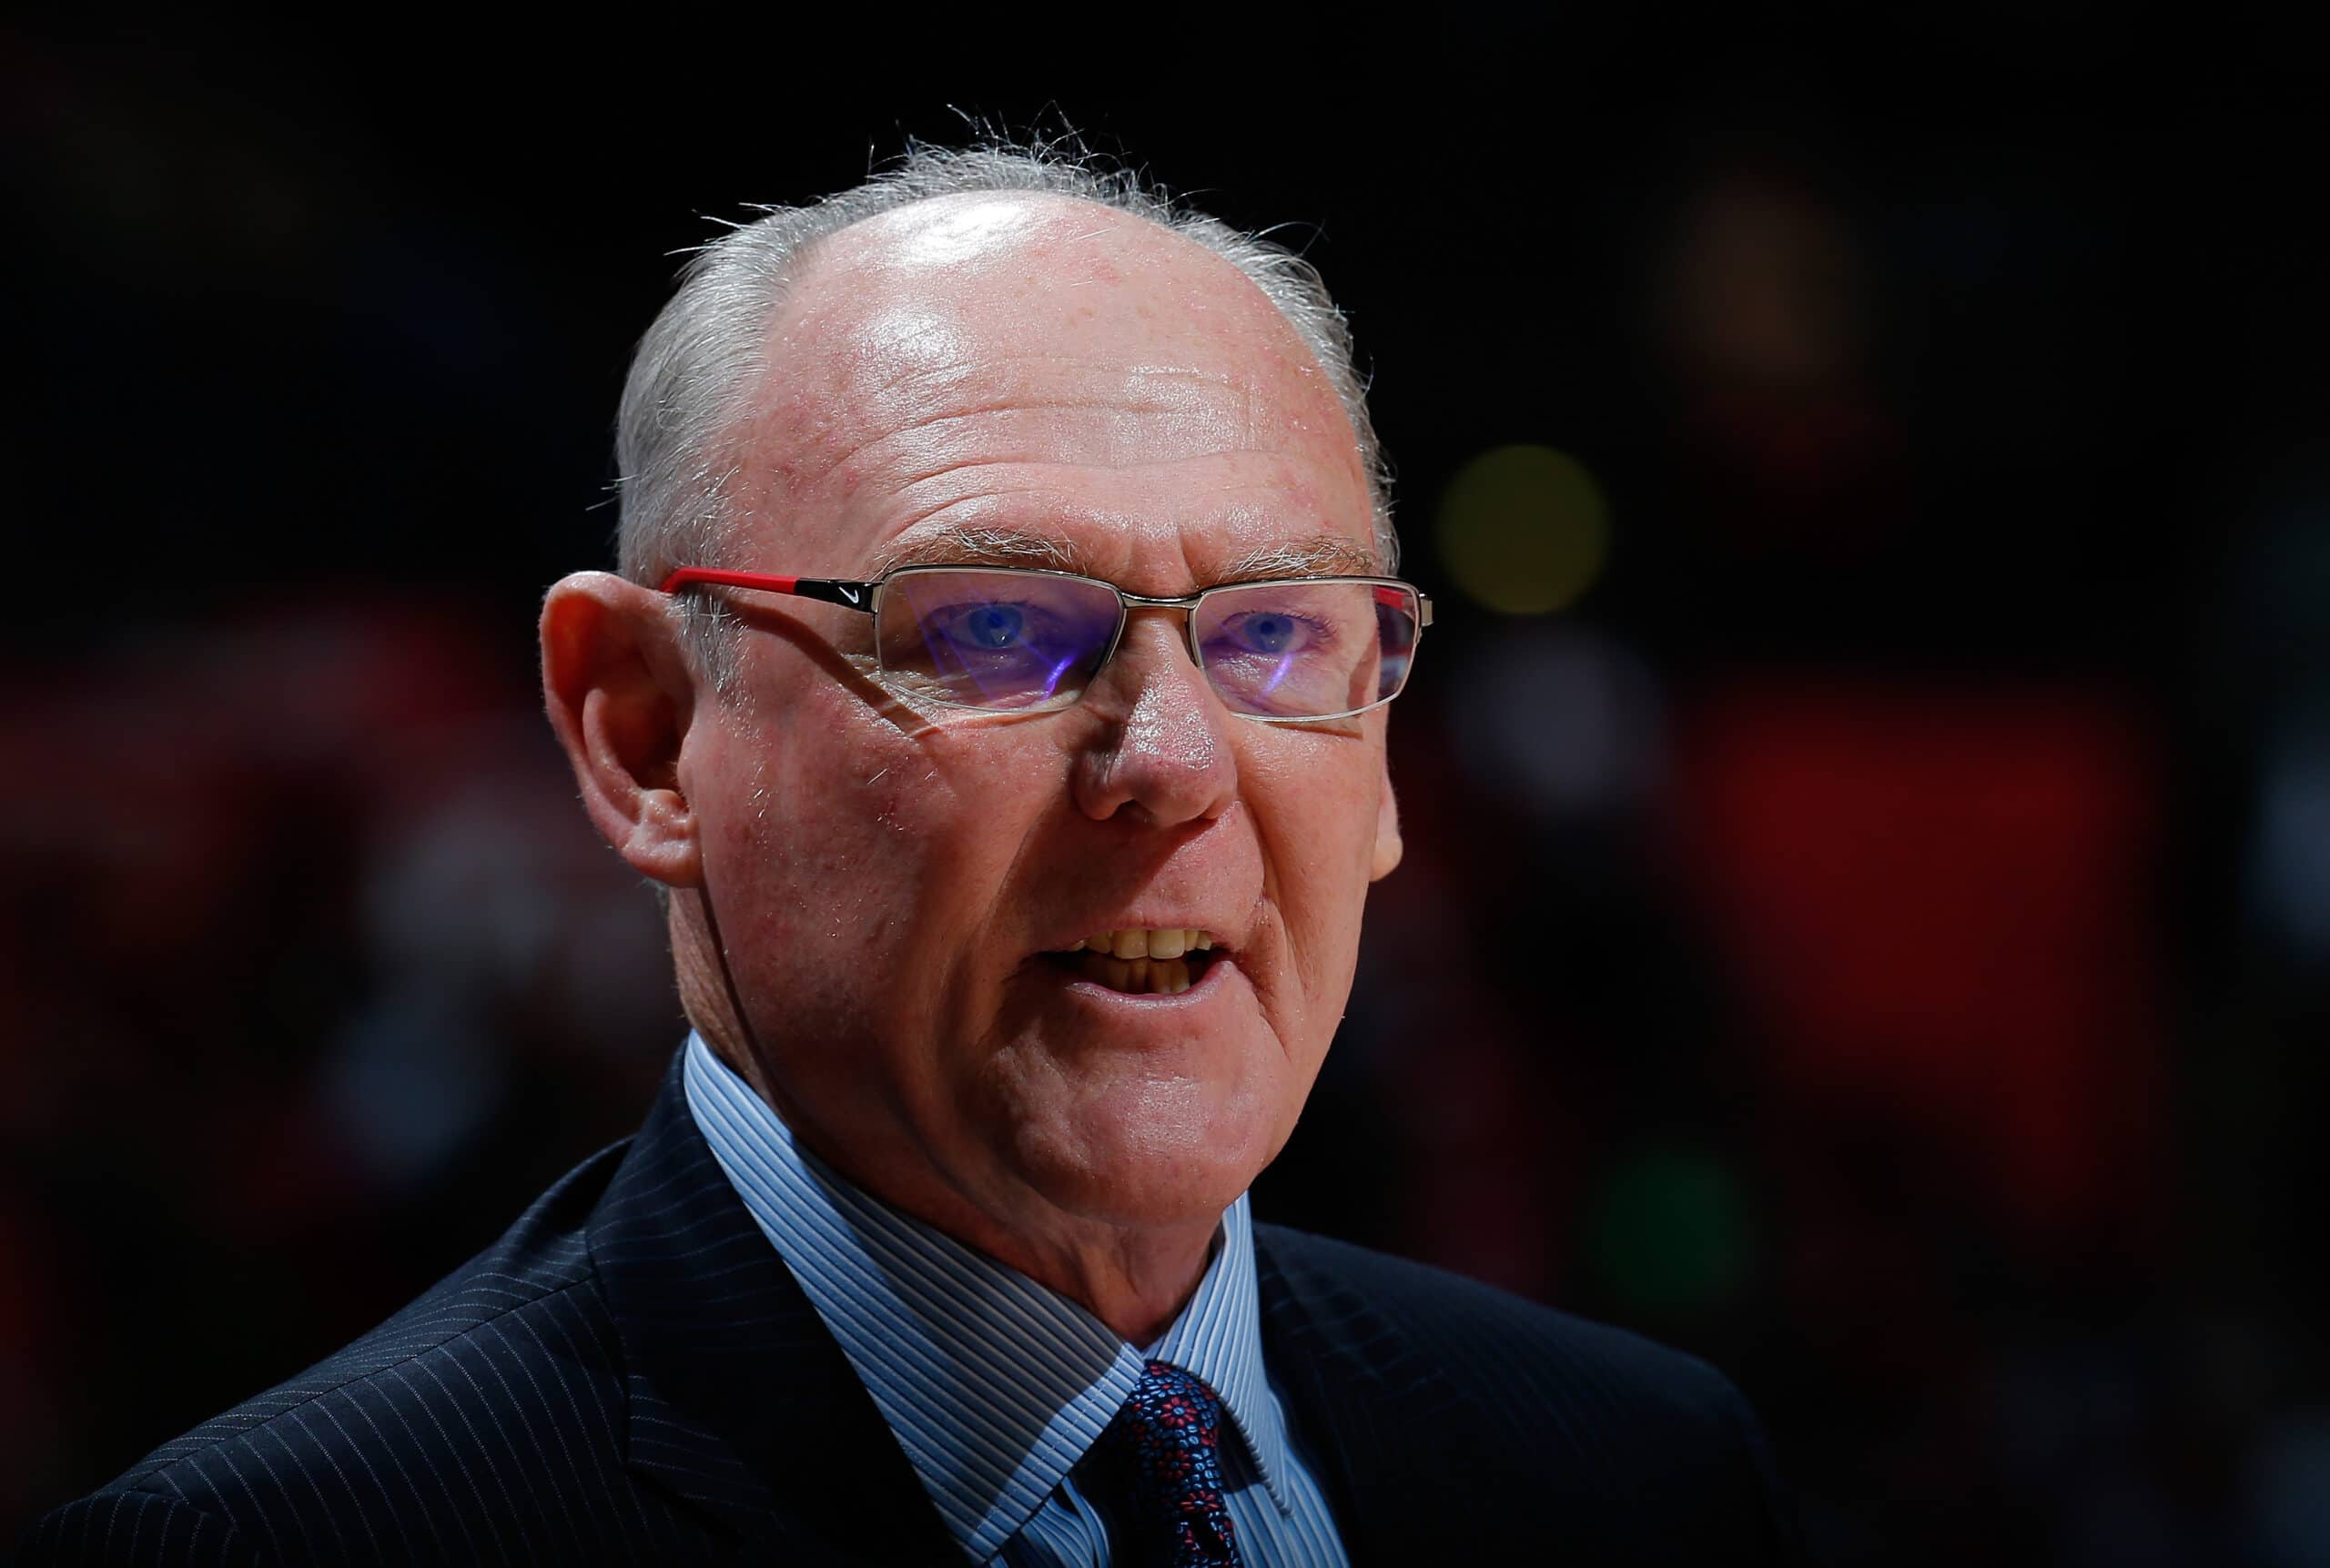 George Karl Believes 1 City Could Have An NBA Franchise Again Soon